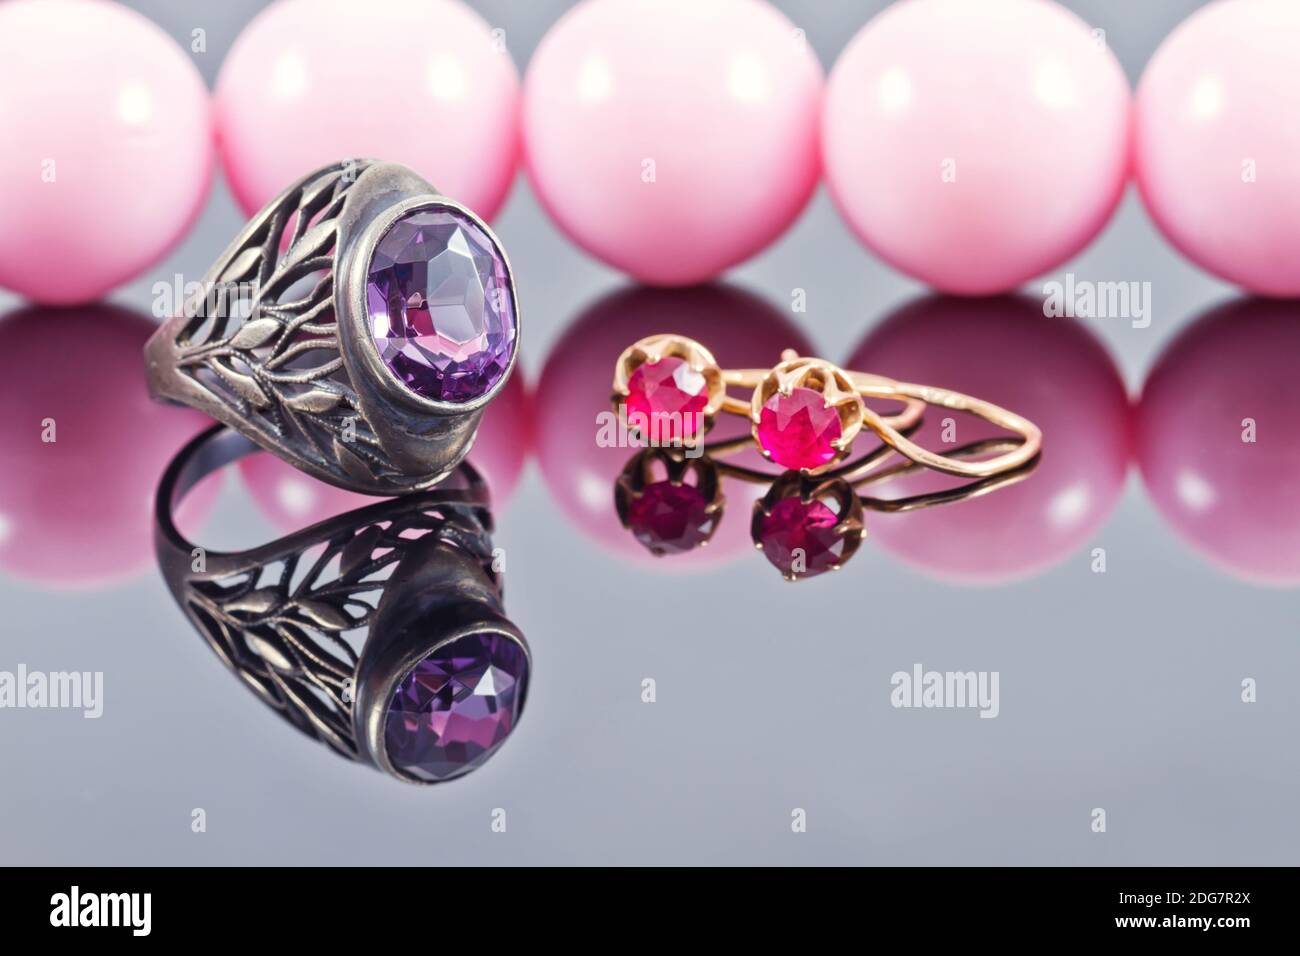 Vintage silver ring with a large amethyst on a background of pink beads with large beads Stock Photo